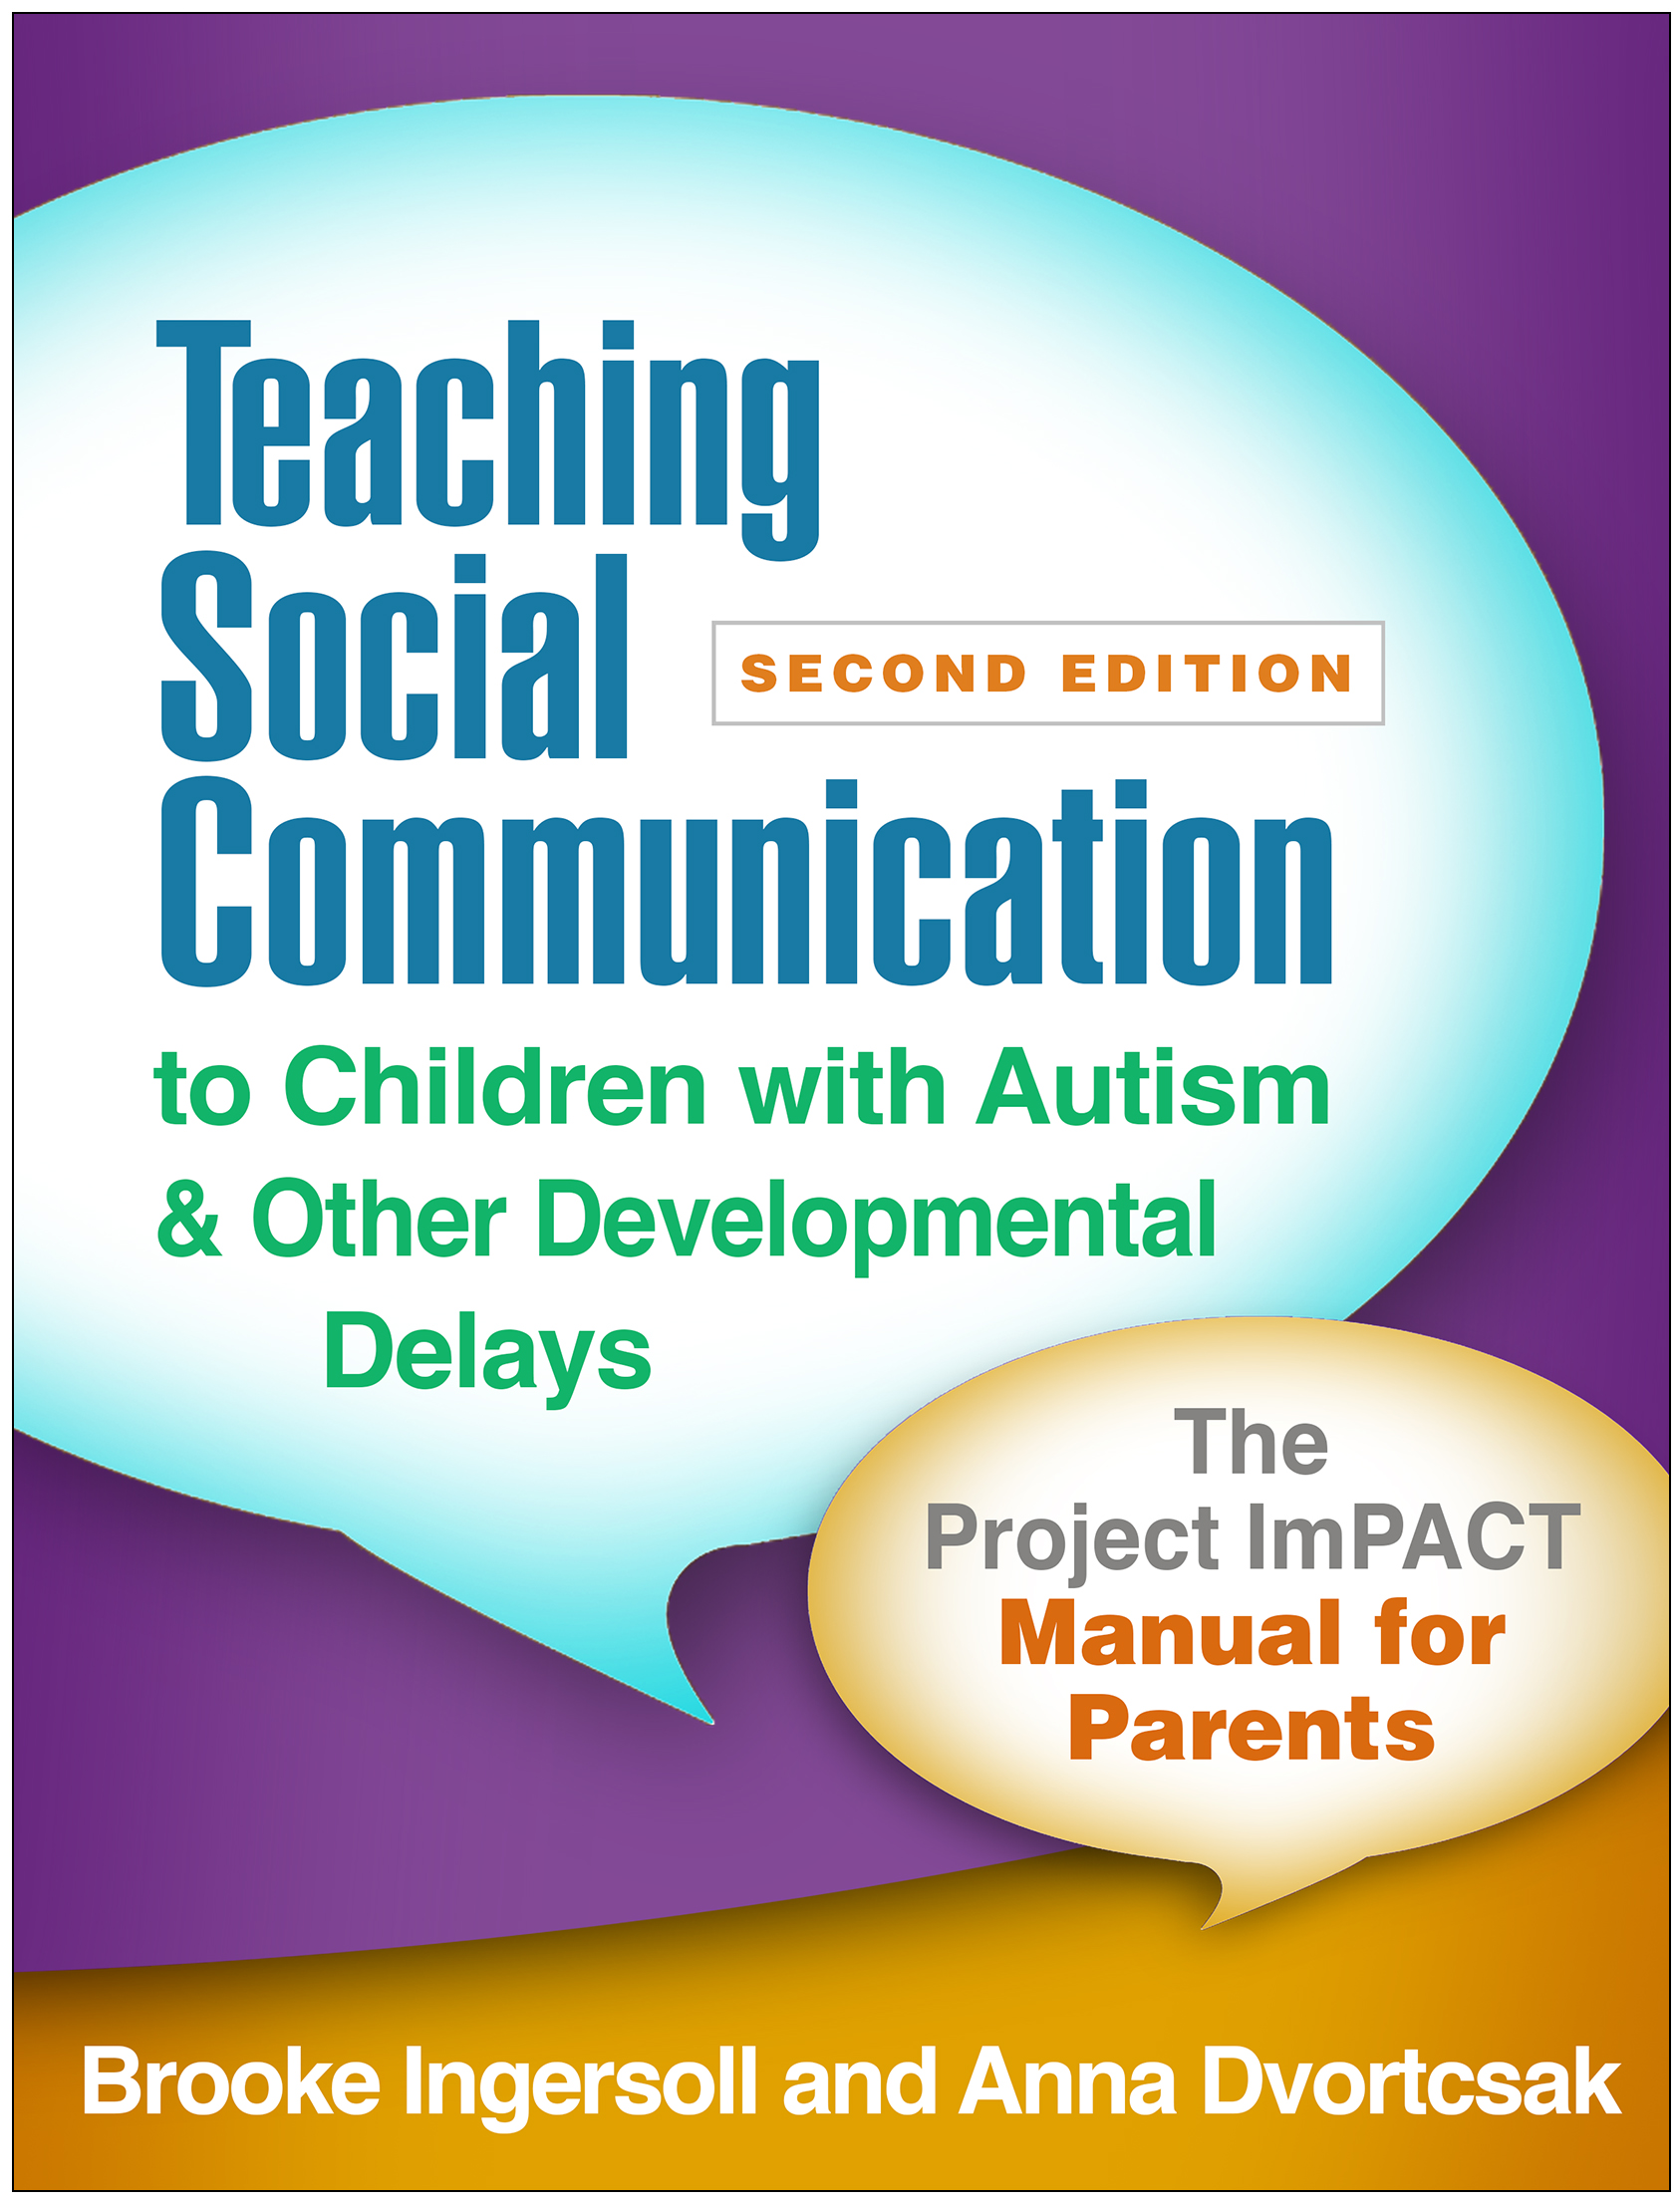 Teaching Social Communication to Children with Autism and Other Developmental Delays